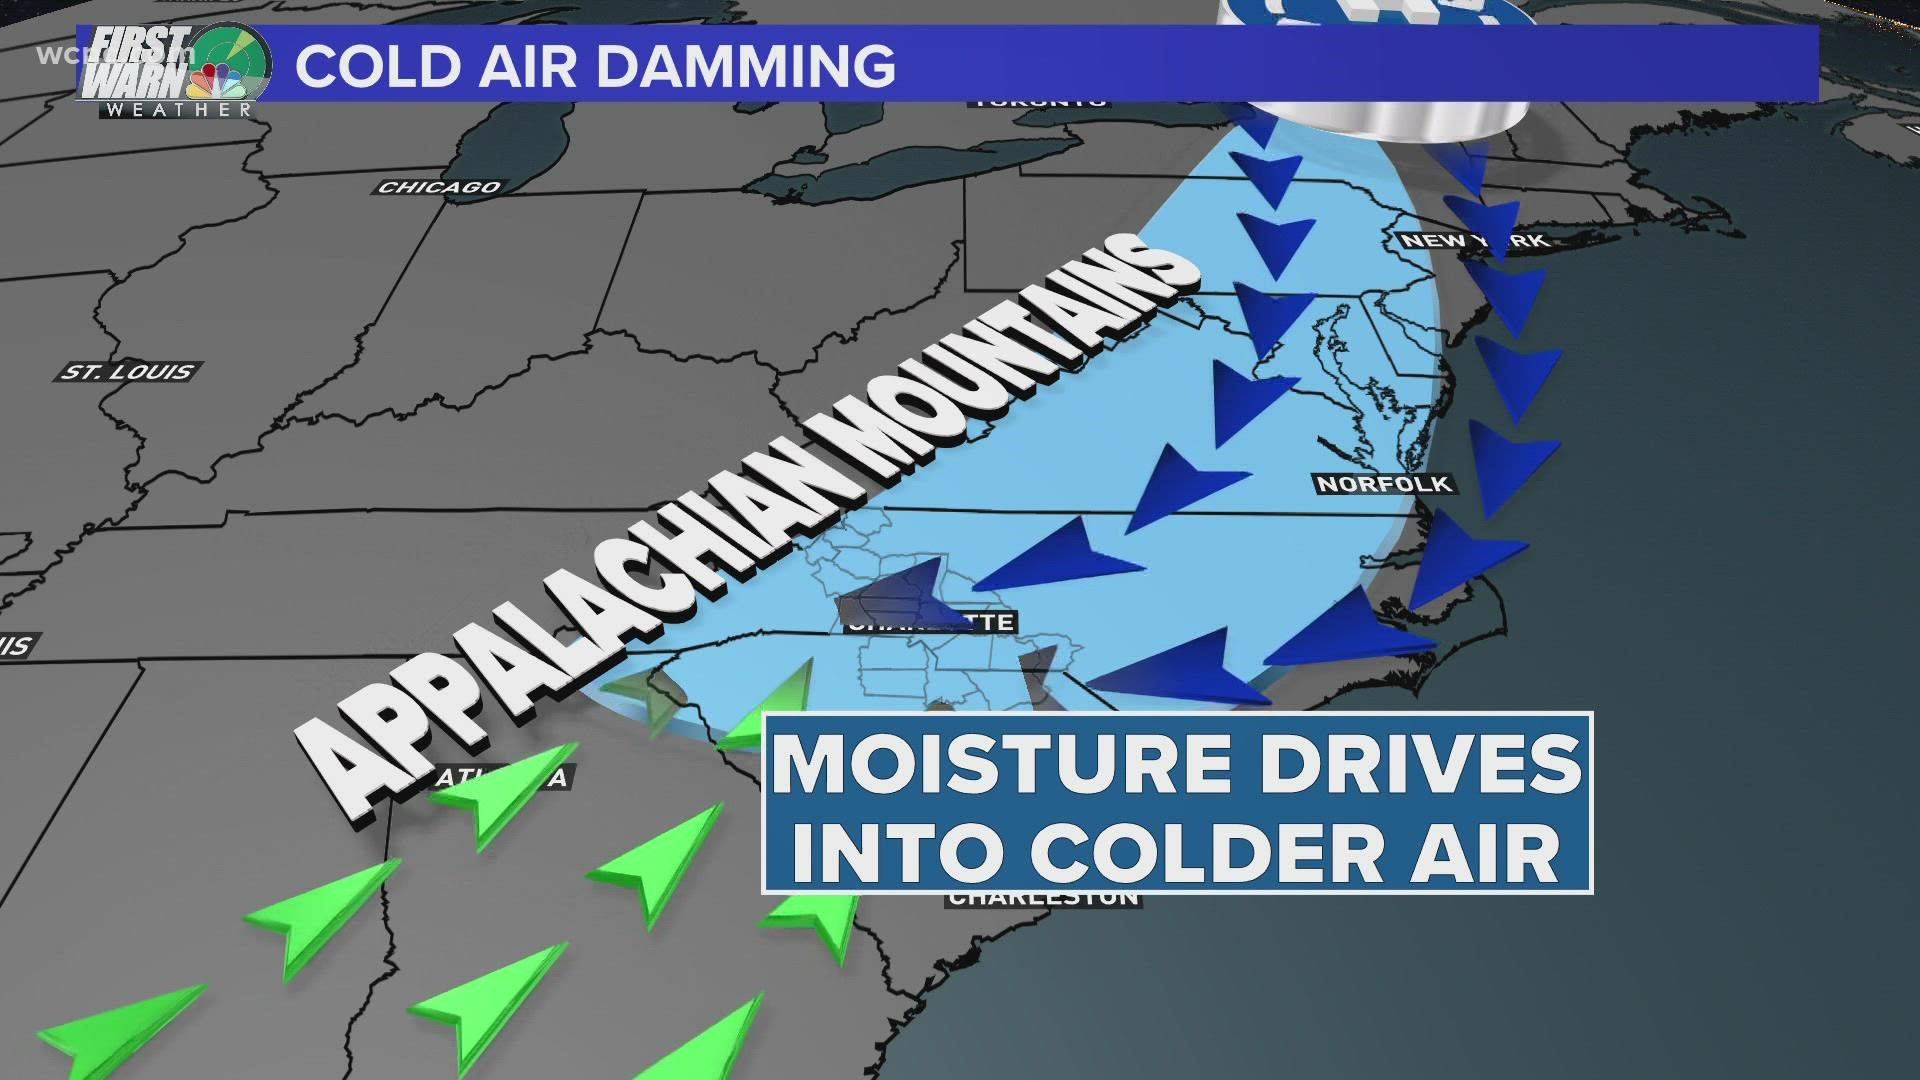 Winter begins in a little over 50 days, but it's already starting to look and feel like it in the Carolinas.